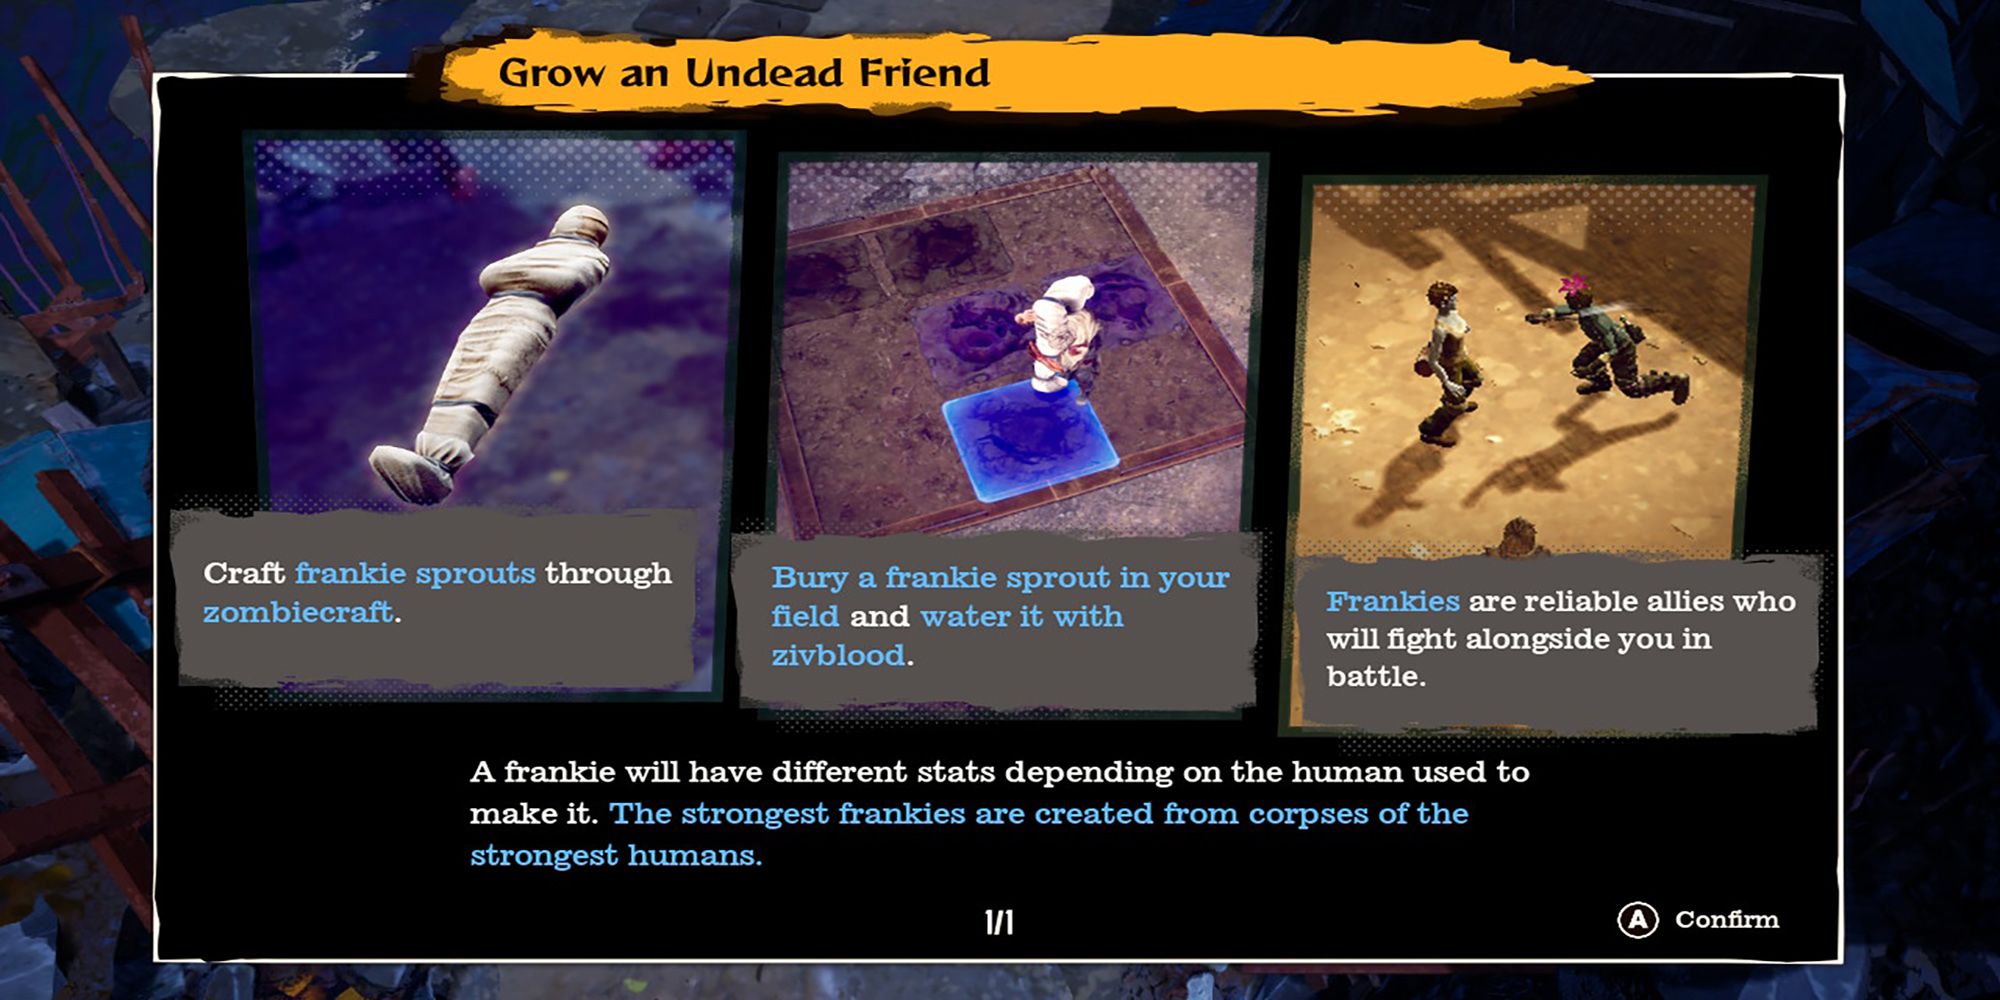 The "Grow An Undead Friend" Tutorial breaks down how to grow Frankies and have them fight alongside you in Deadcraft.